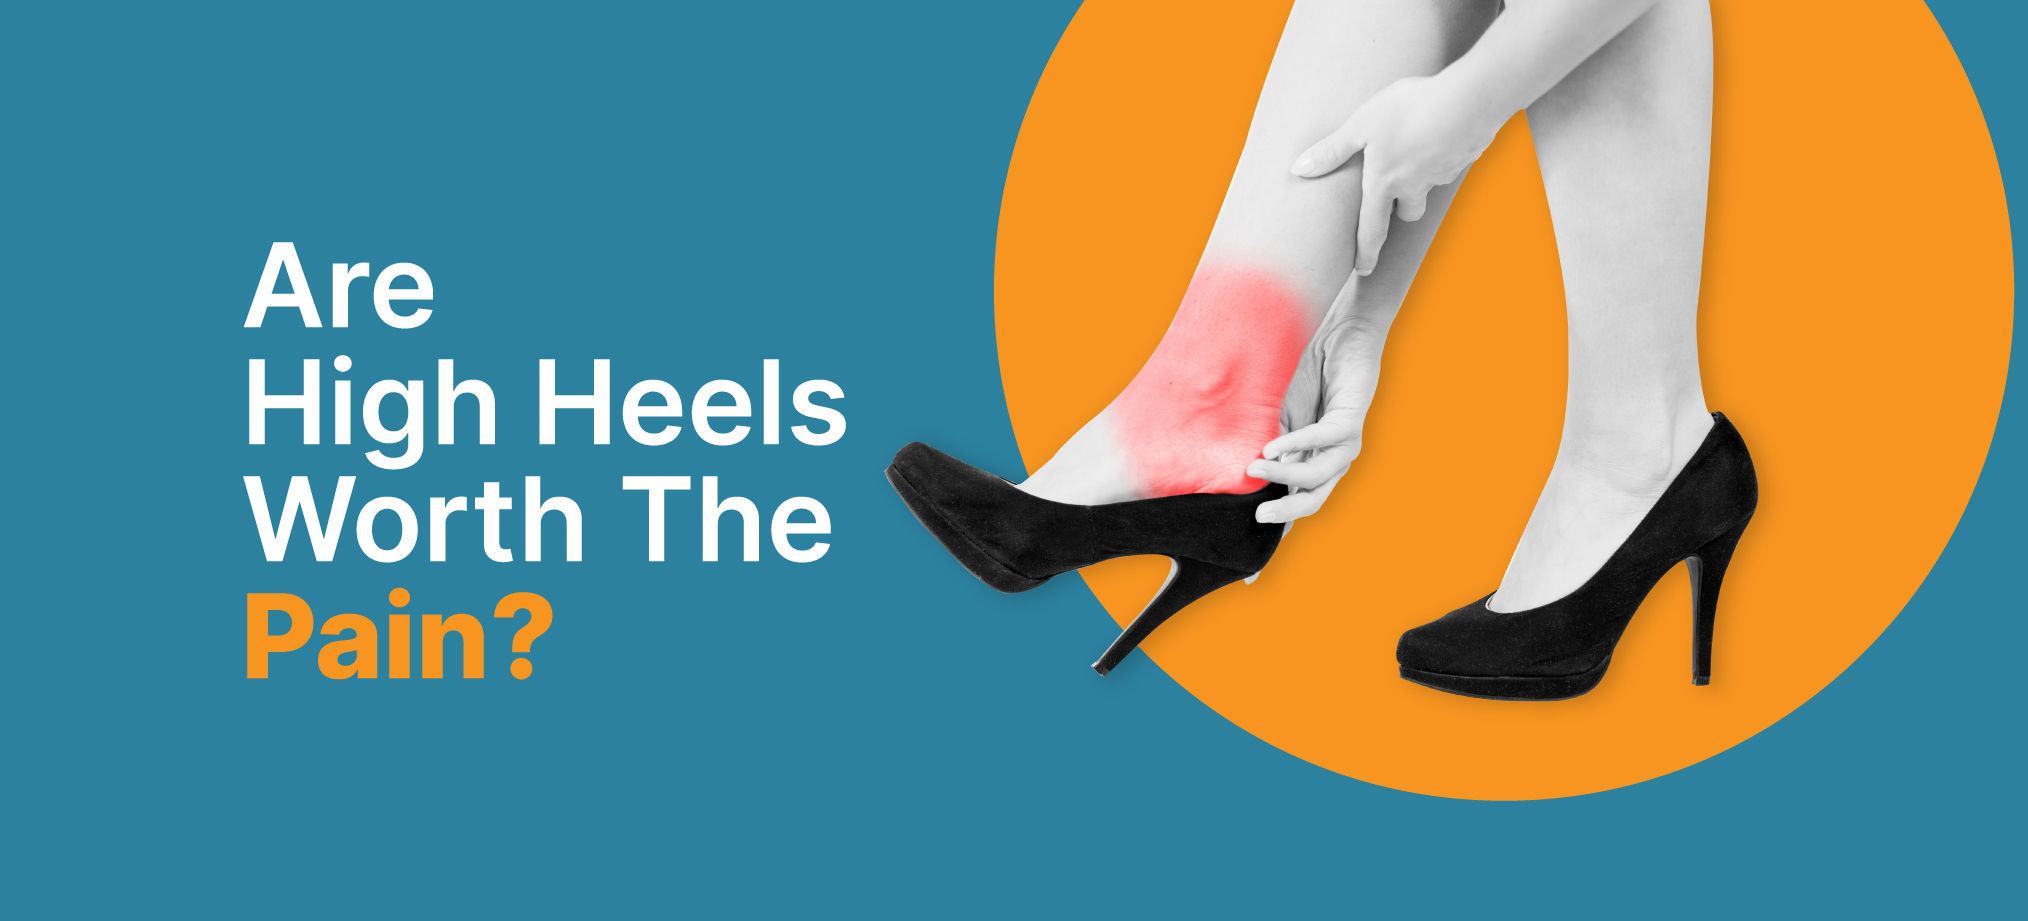 5 Reasons to Switch Out the High Heels - Coury & Buehler Physical Therapy